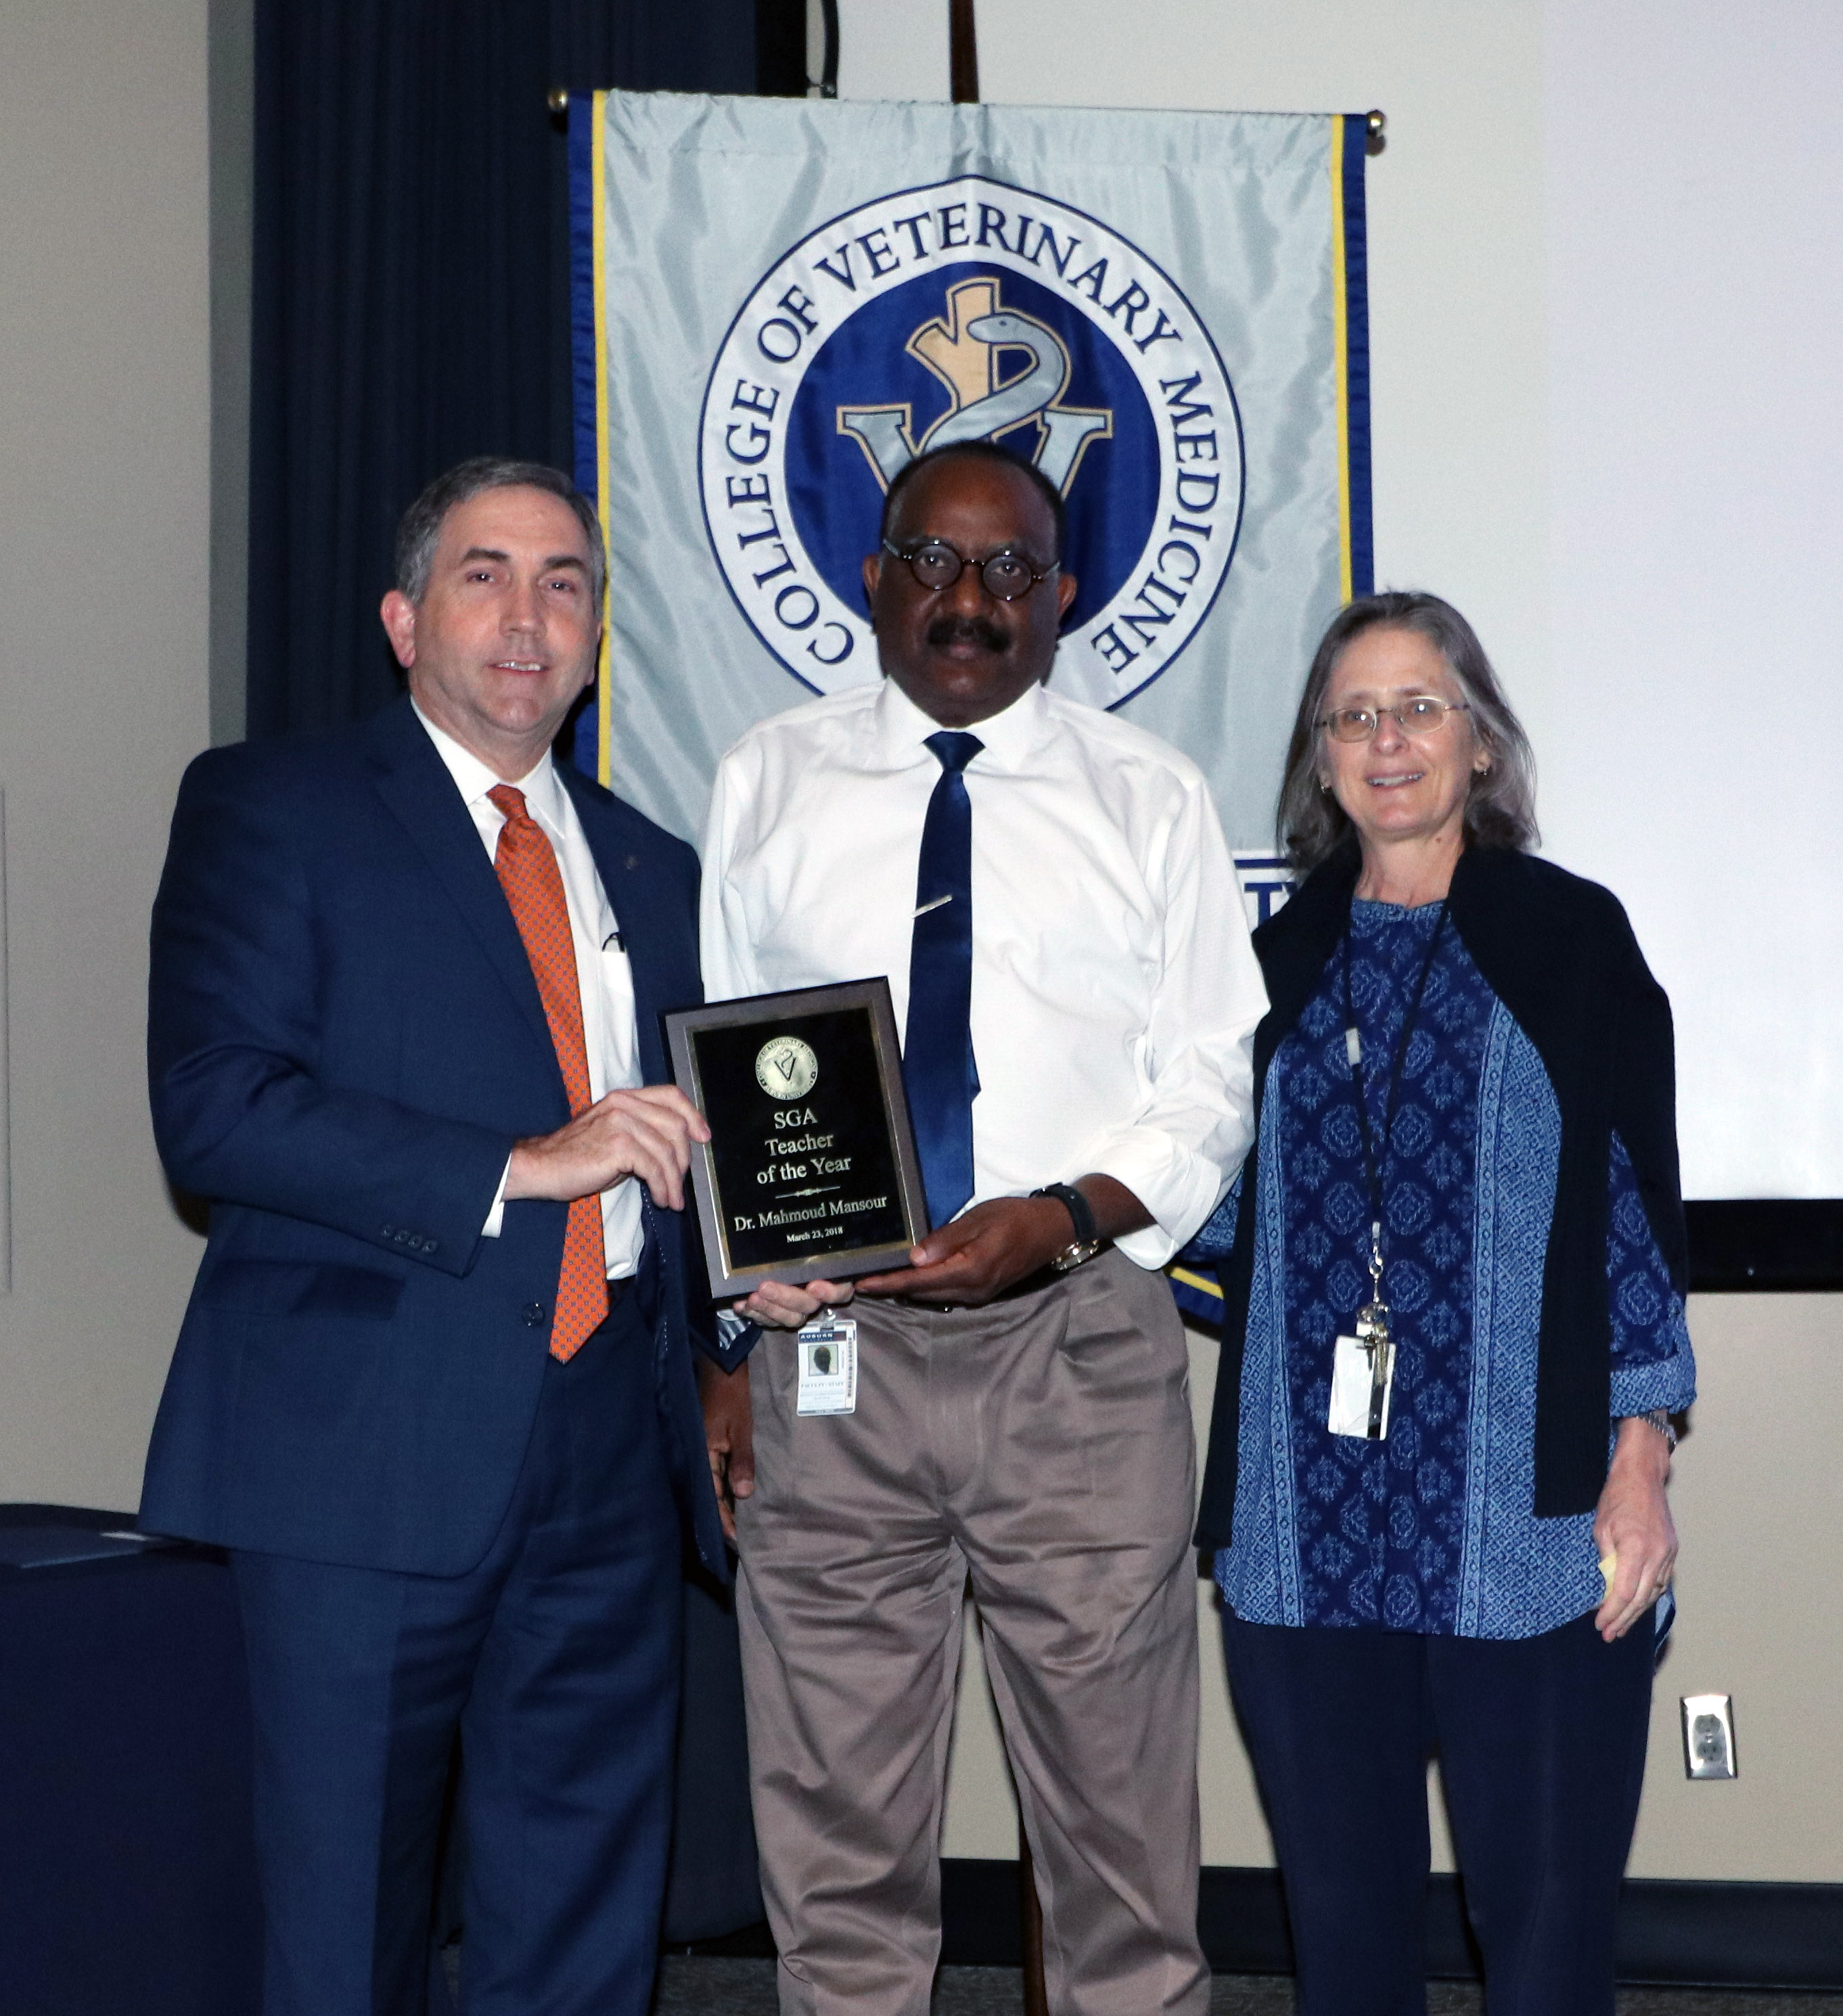 Dean Johnson, Dr. Mansour and Dr. Elaine Coleman, who presented the award.